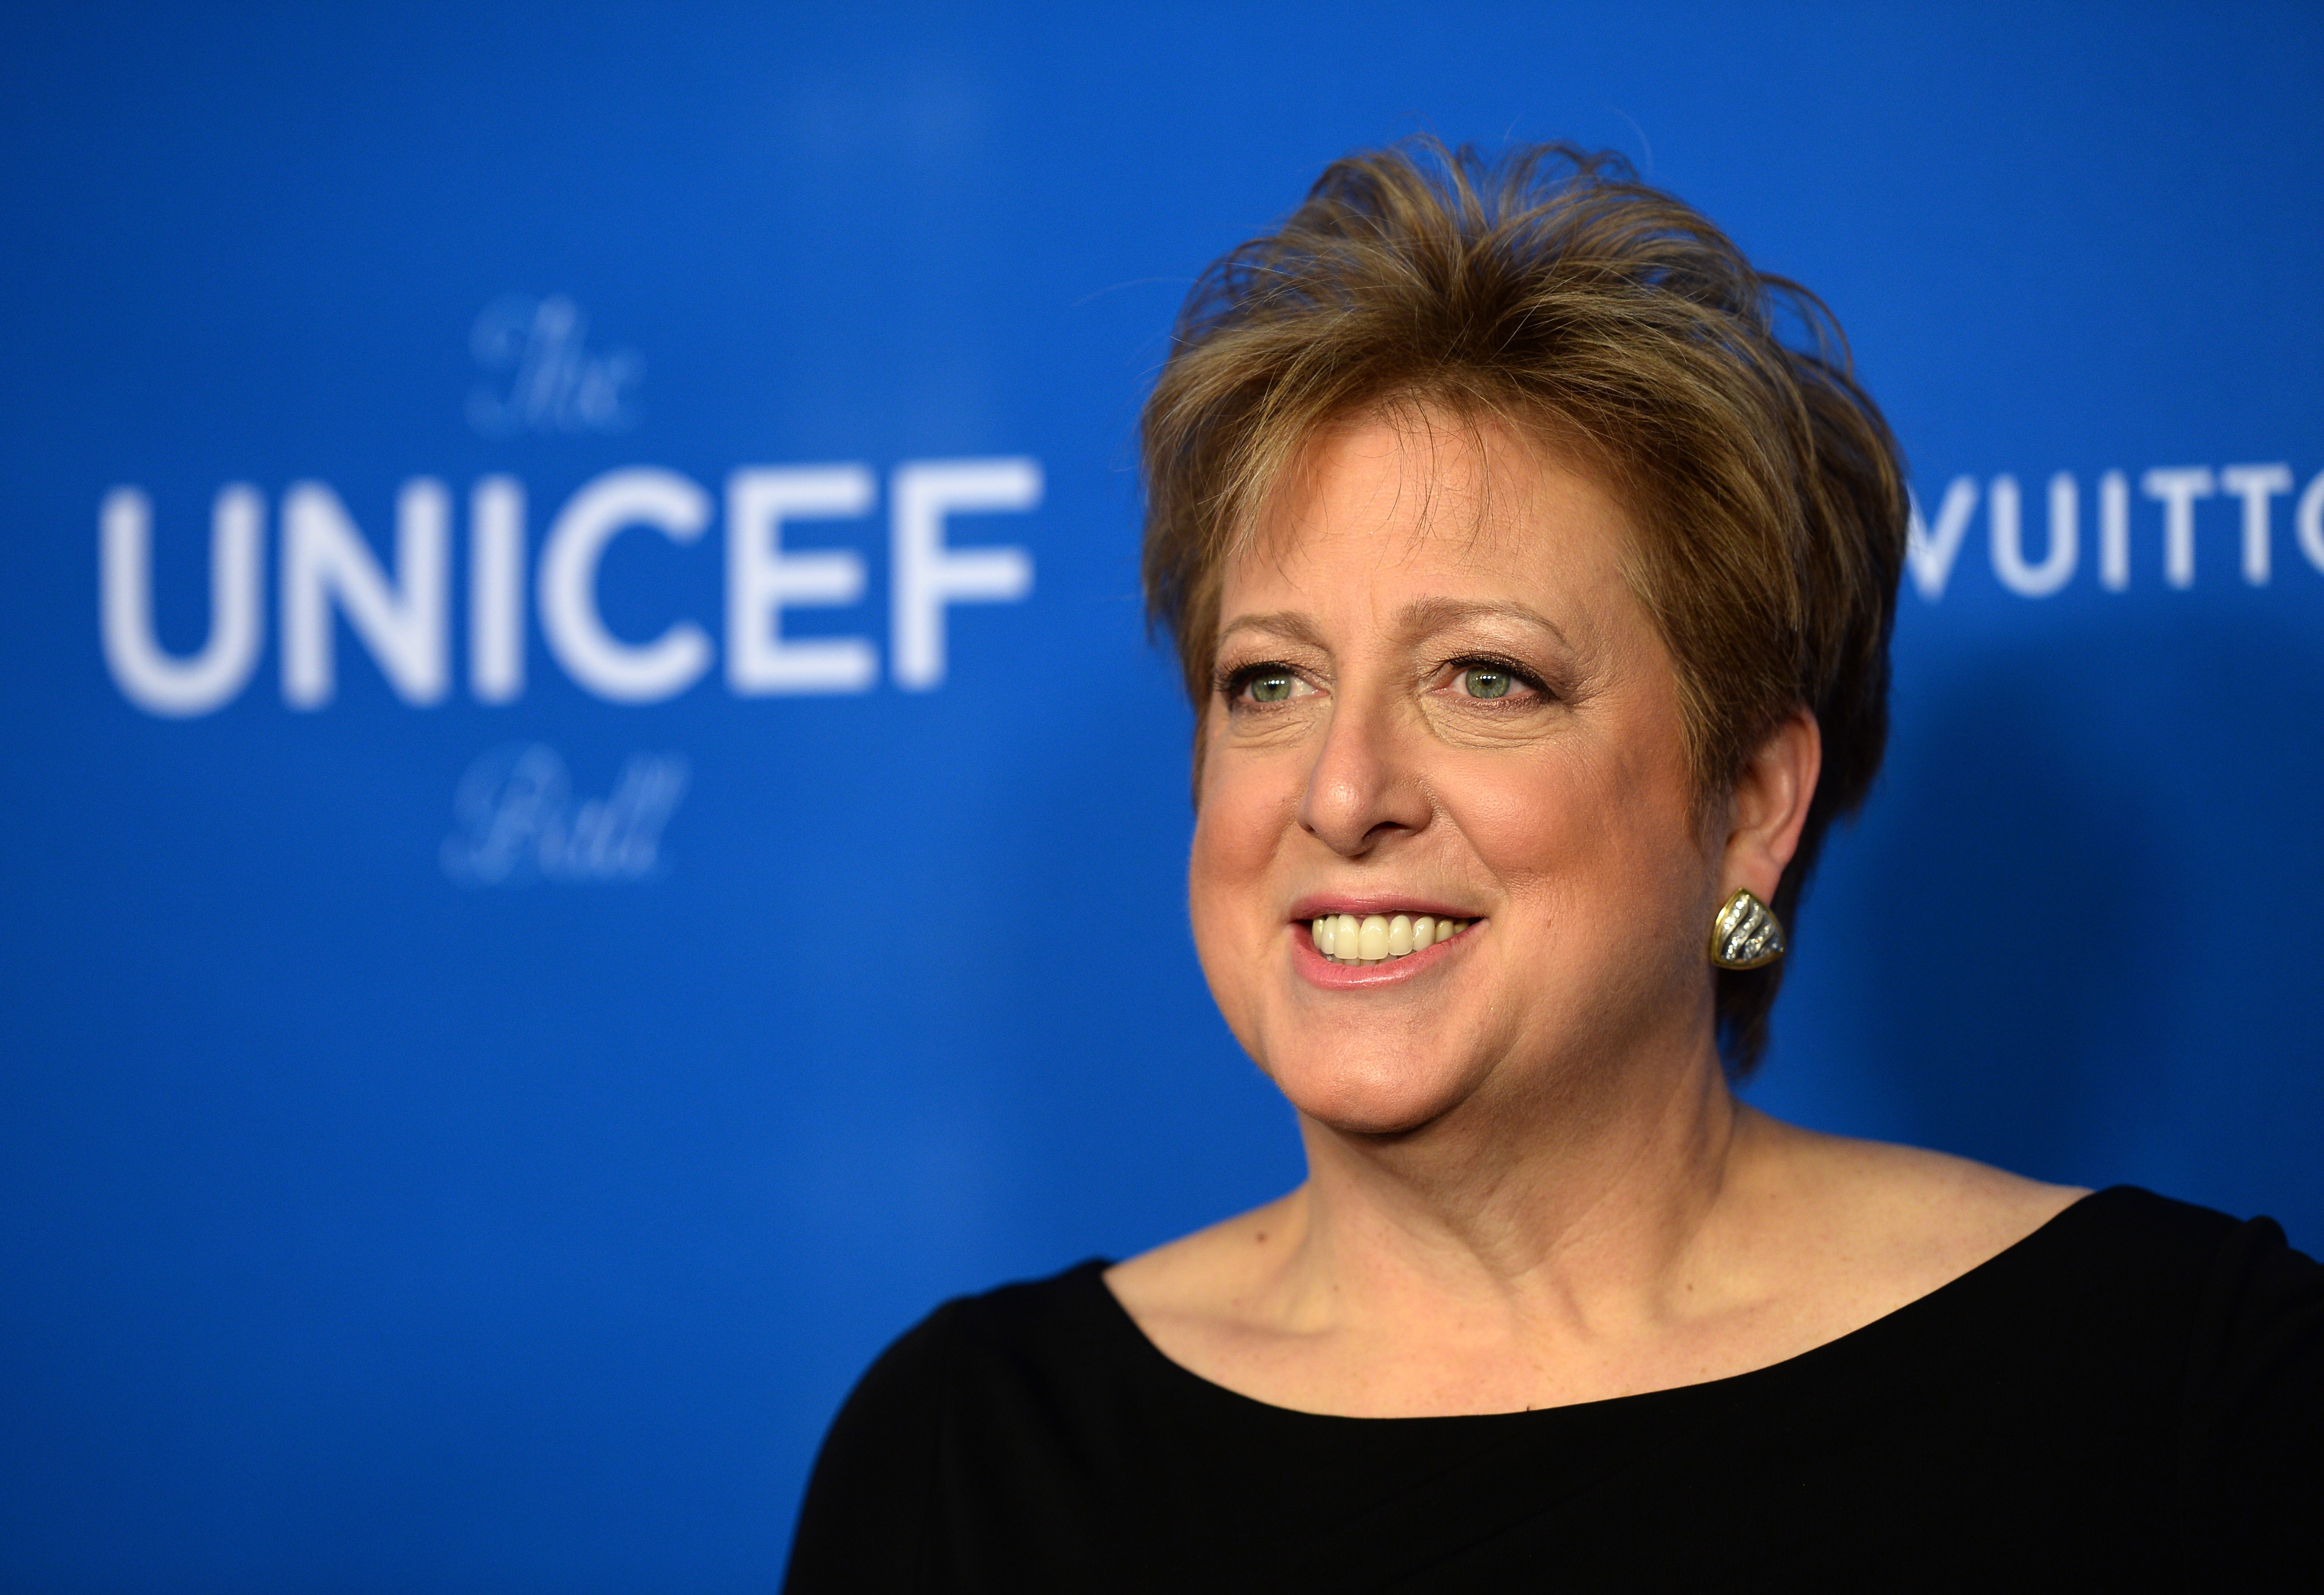 President and CEO U.S. Fund for UNICEF Caryl M. Stern arrives at the 6th Biennial UNICEF Ball at the Beverly Wilshire Four Seasons Hotel on in Beverly Hills, Calif., on Jan. 12, 2016. (Amanda Edwards—WireImage)